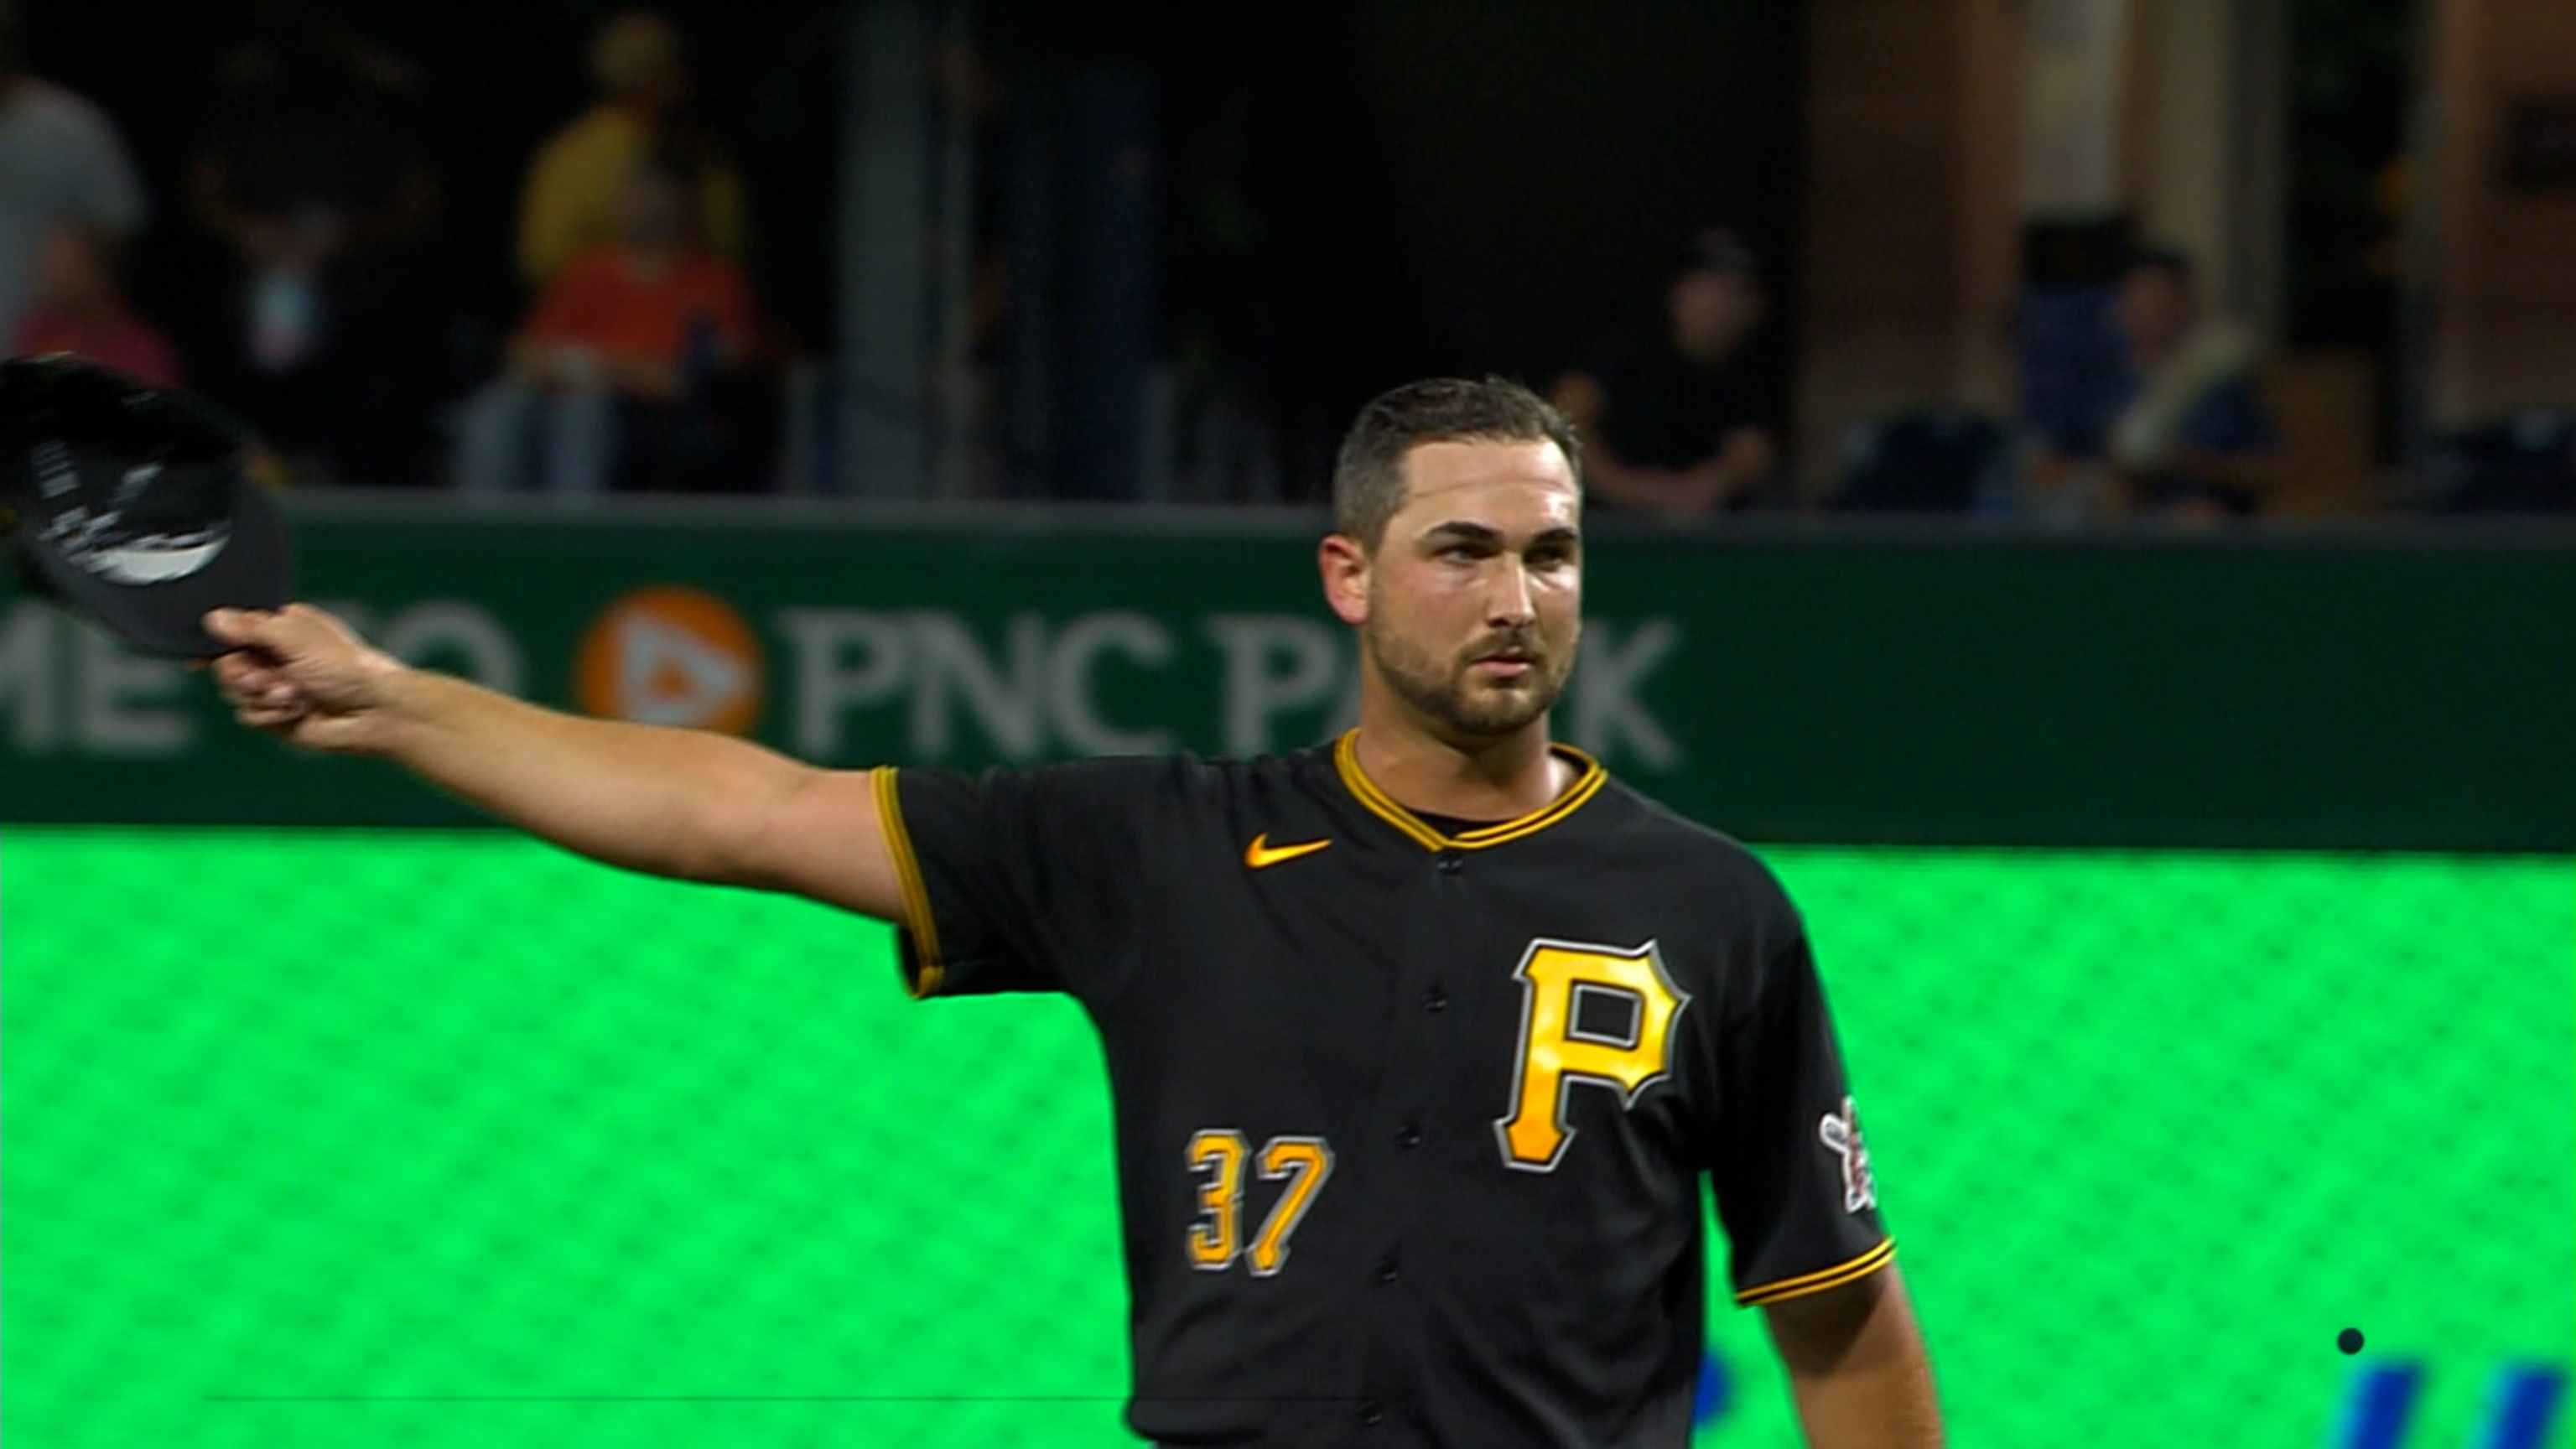 Pirates' Keller exits against Red Sox with shoulder fatigue - The